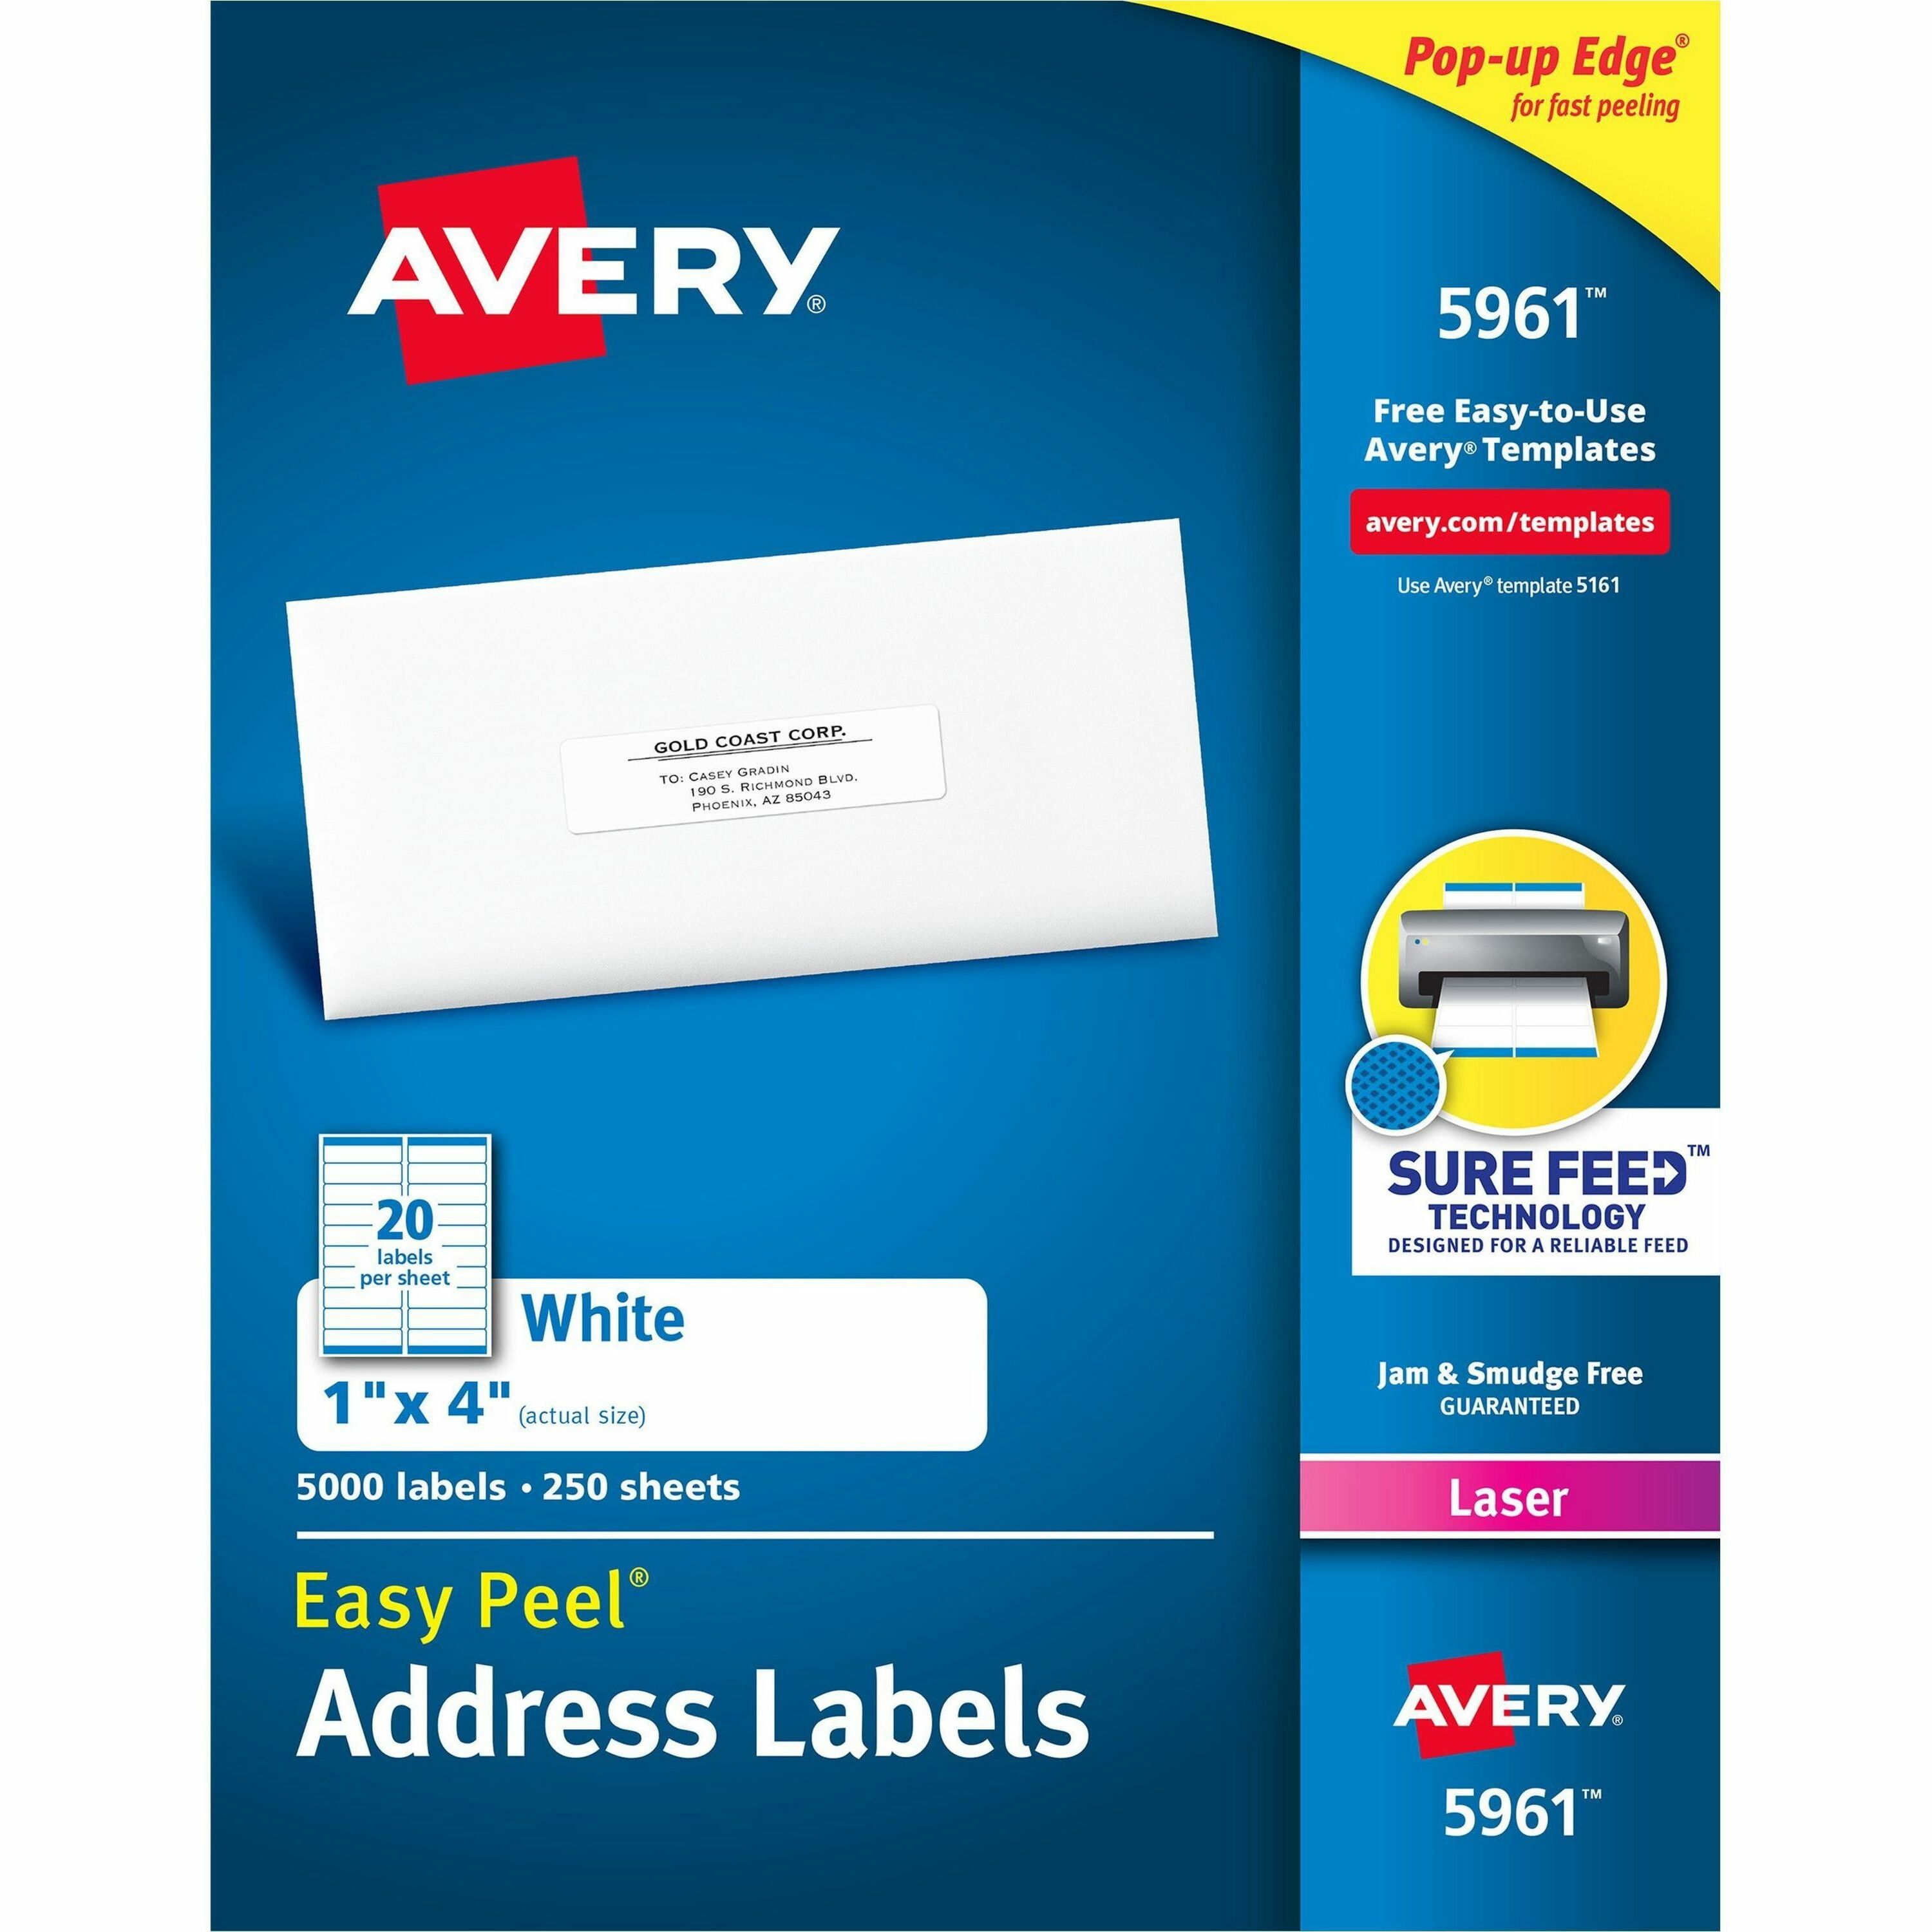 printing avery template in word